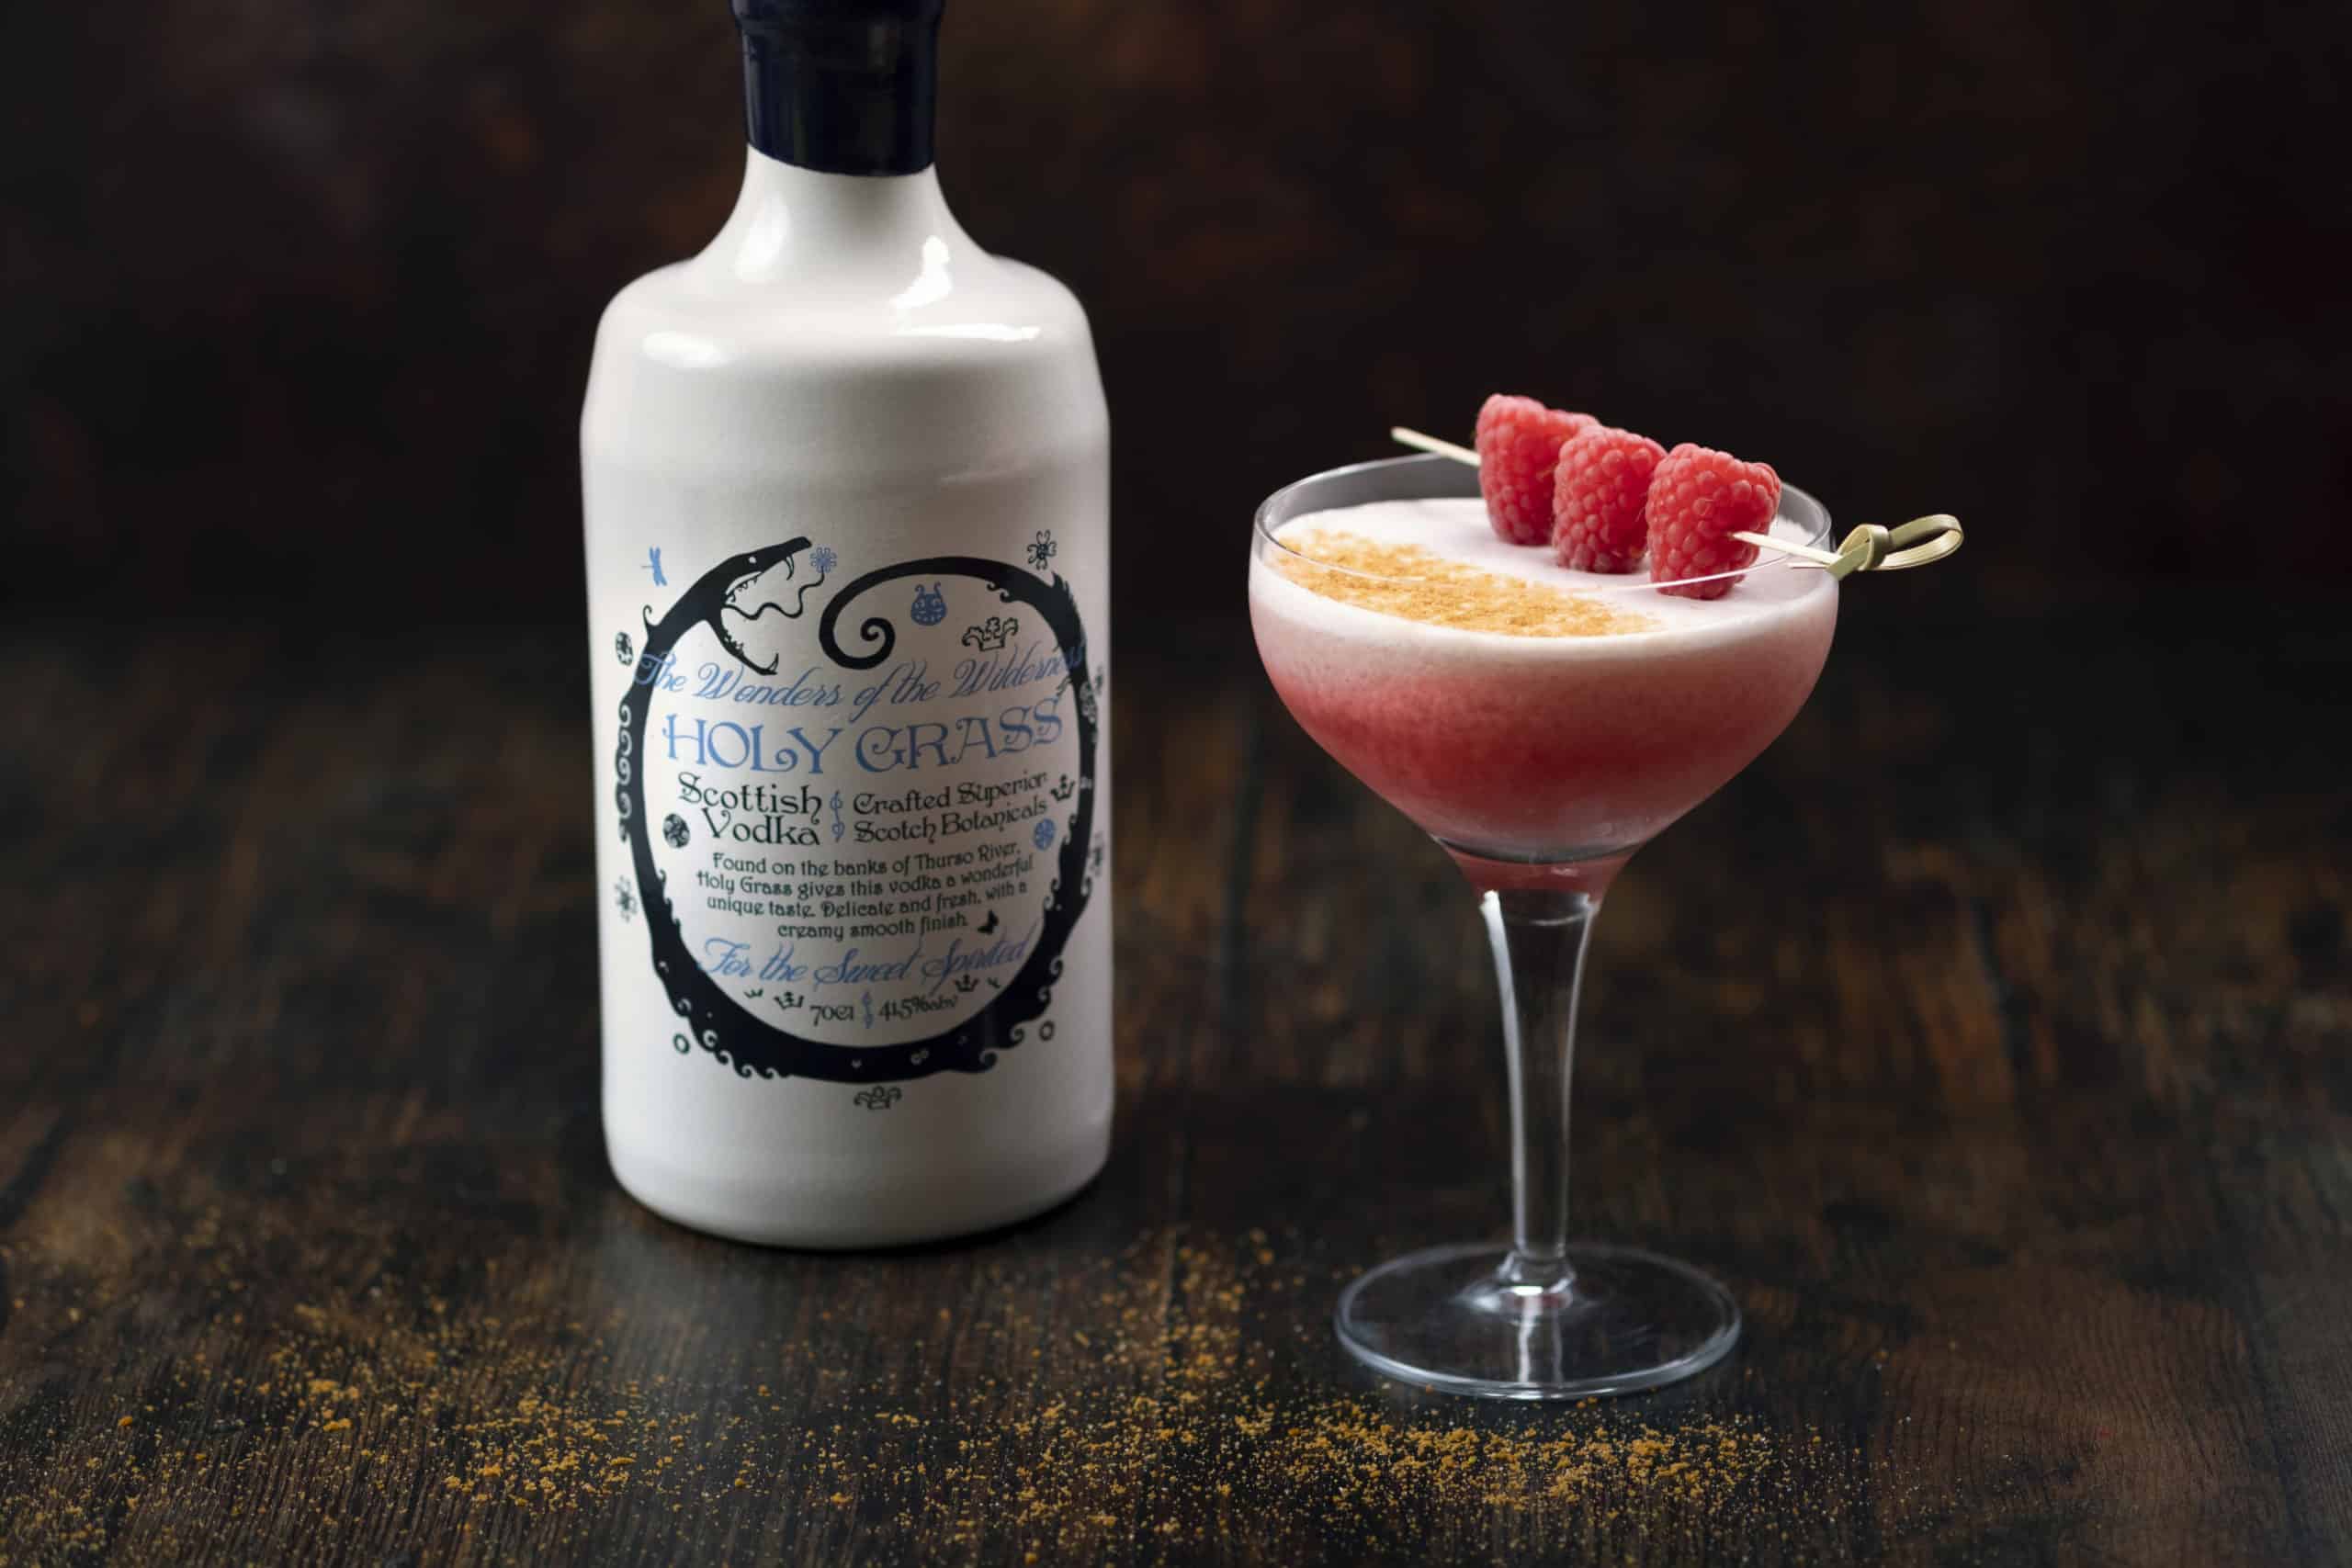 Bottle of Holy Grass Vodka and Caithness Cranachan cocktail served in a coupe glass and garnished with finely grated Lotus Speculoos biscuit and skewered raspberries